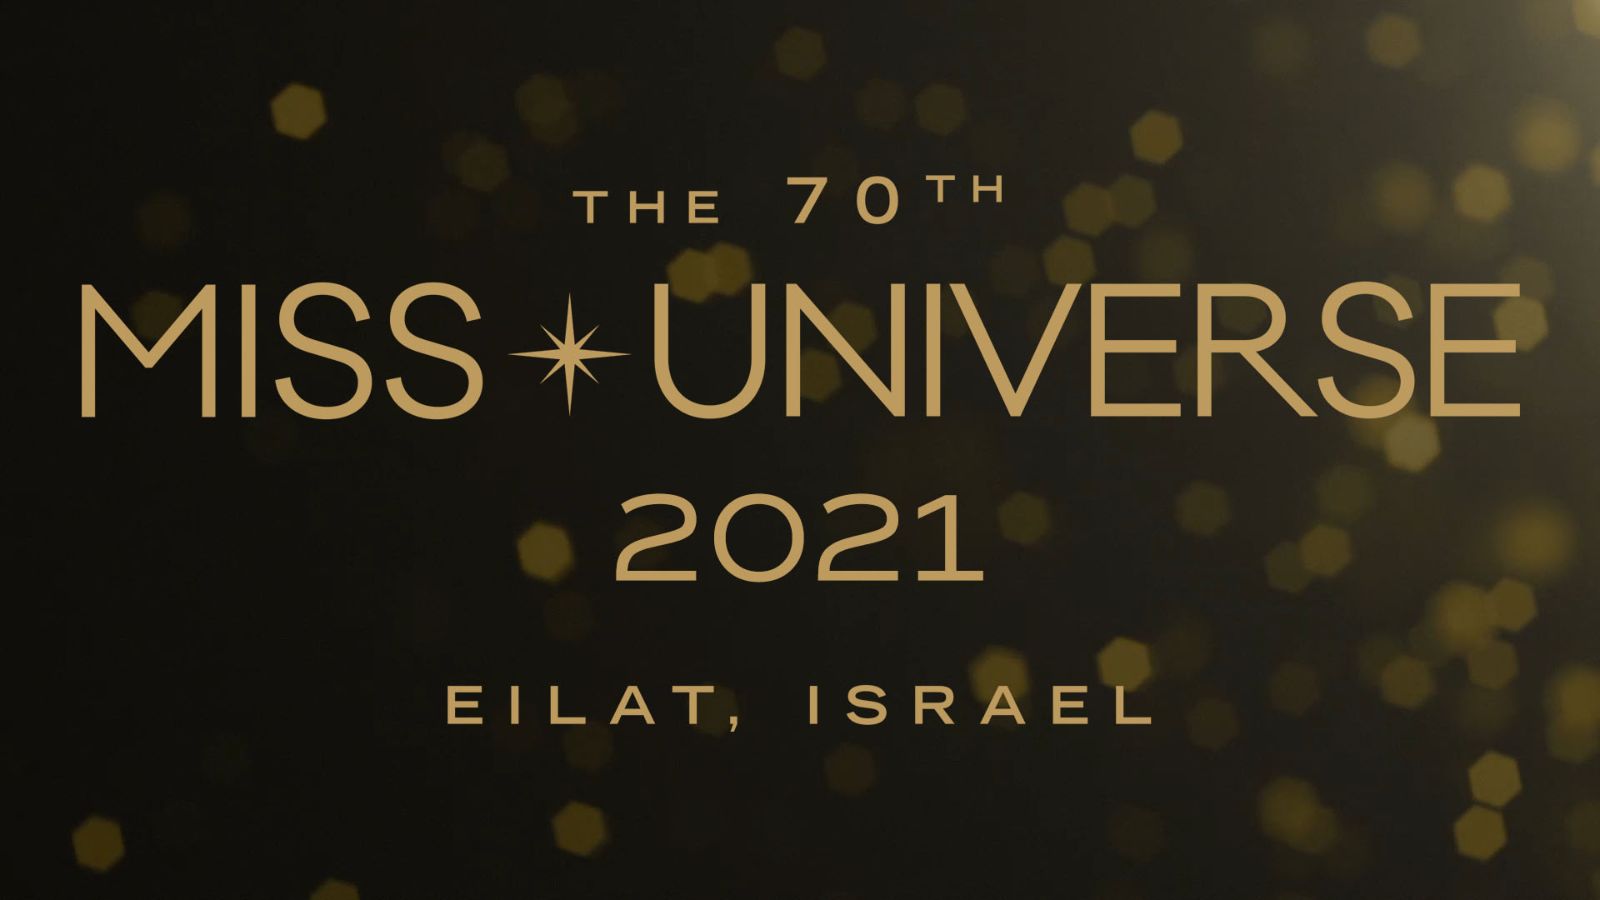 The international Miss Universe beauty pageant will celebrate its 70th anniversary in the Israeli city of Eilat.